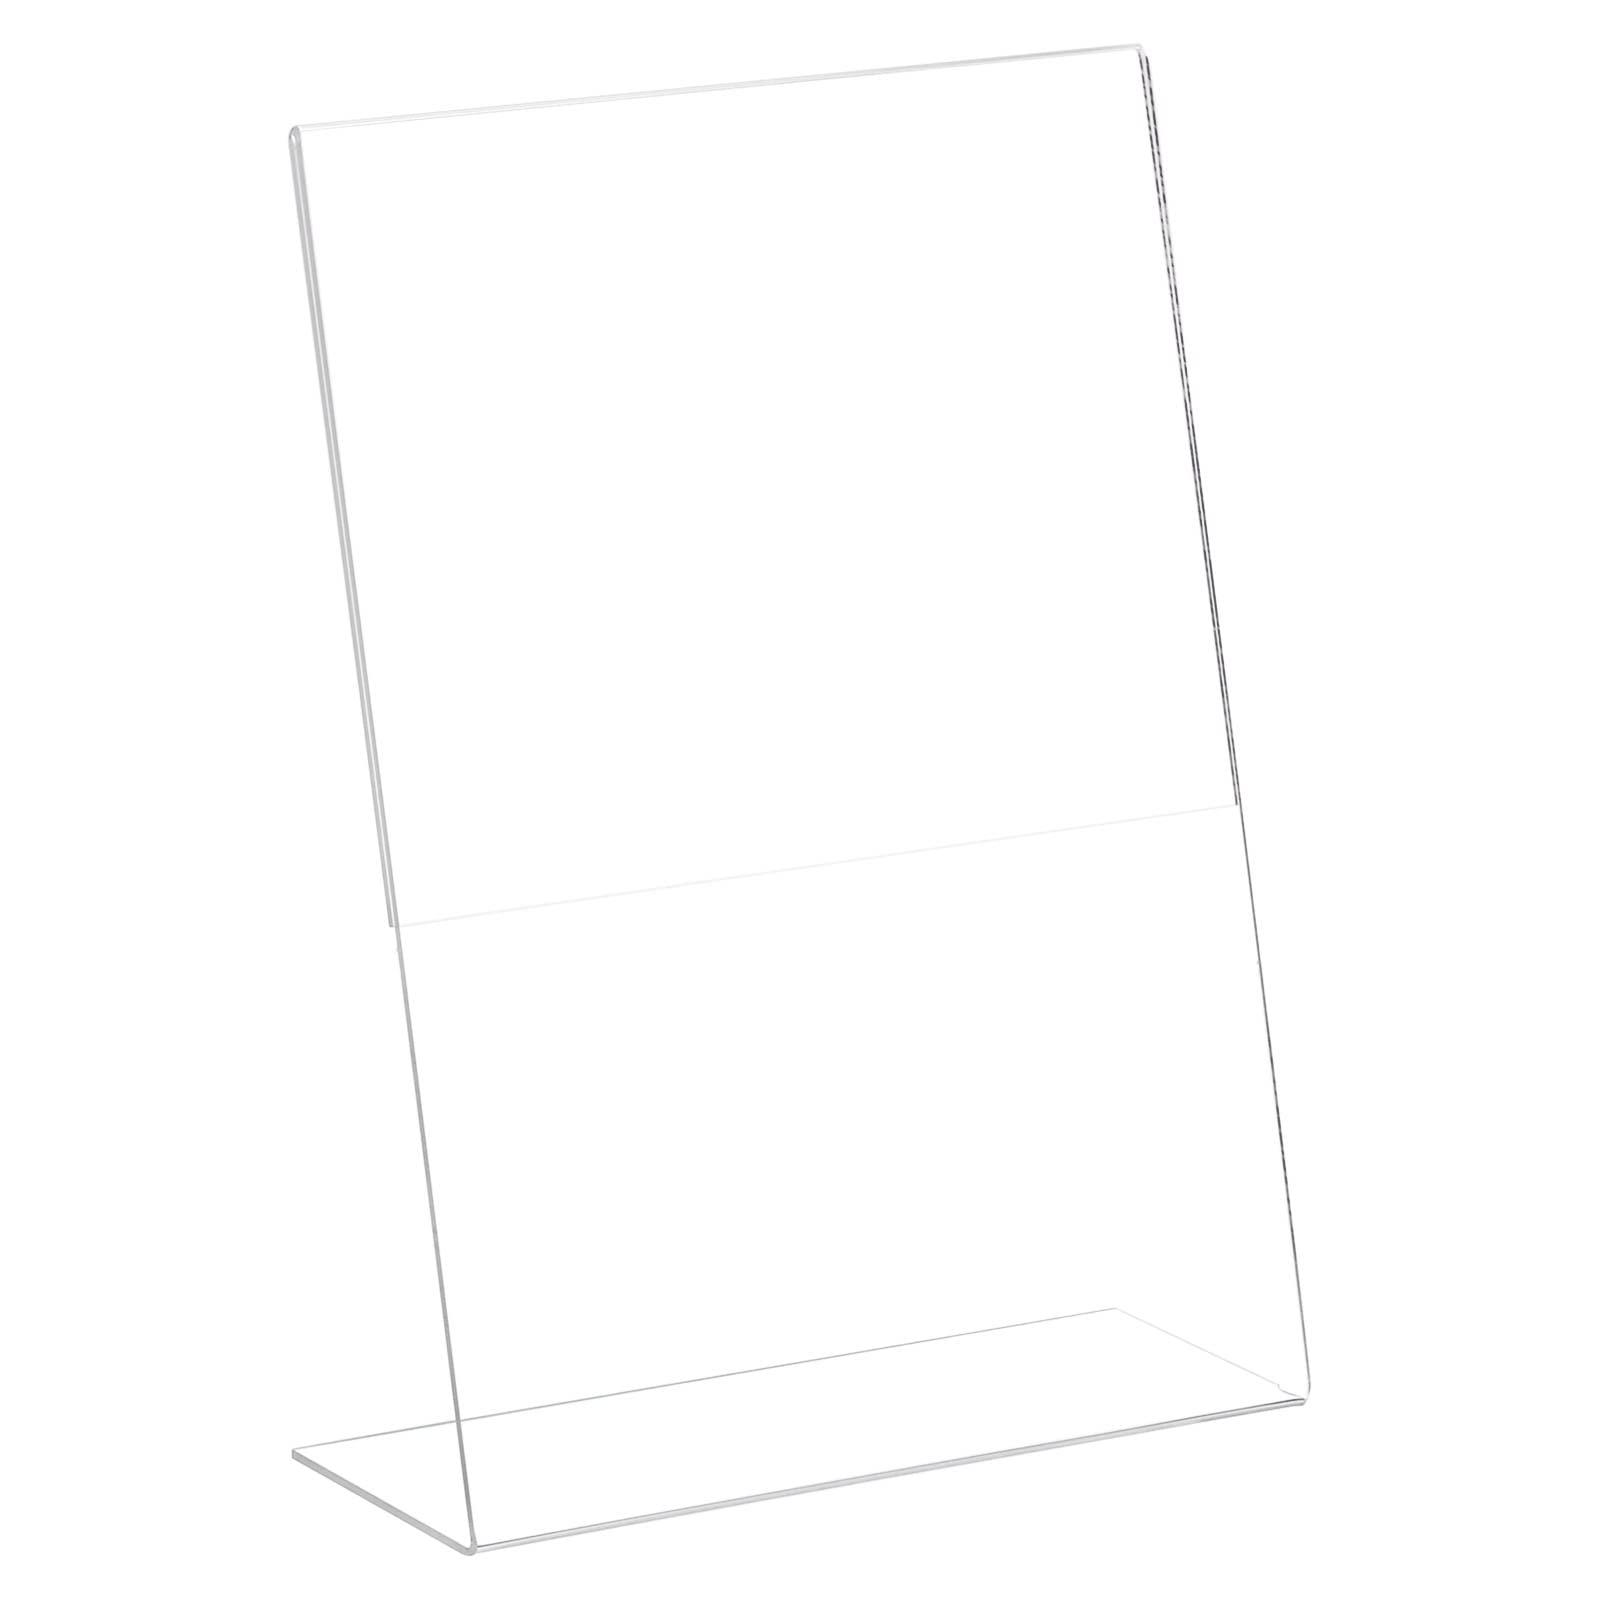 sourcing map Acrylic Sign Holder 24 Pack, 8.5x11 Inches L Shaped Desktop Sign Holder Menu Display Stand Suitable for Restaurants, Office, Home, Store - Clear